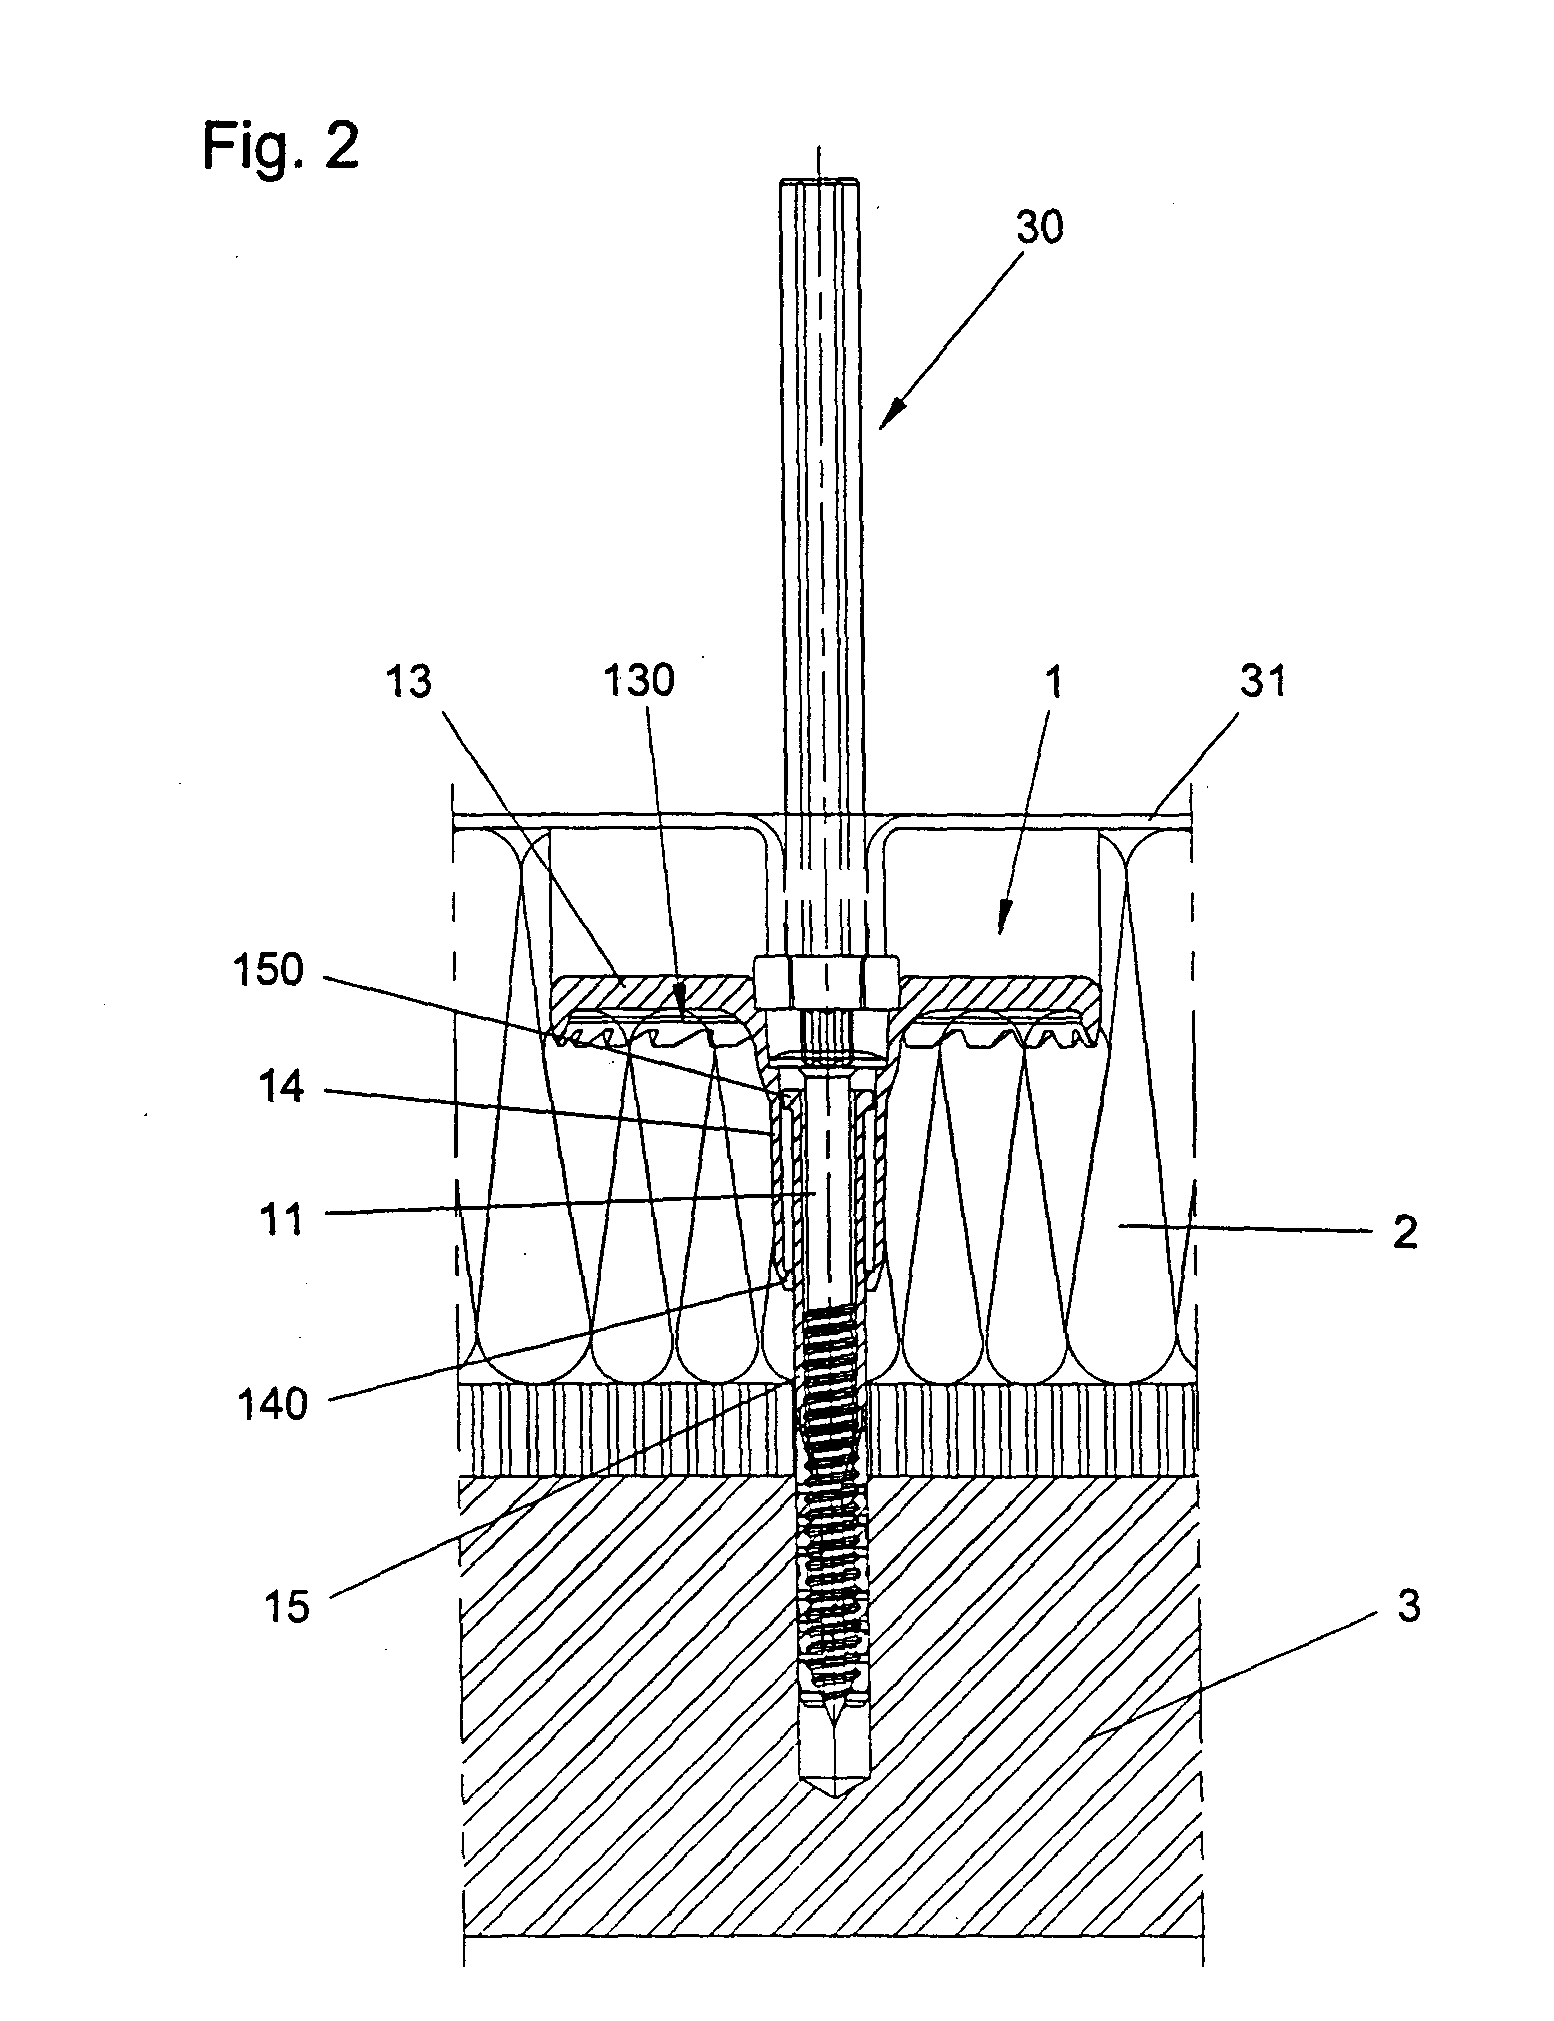 Dowels and methods for the assembly of insulating panels